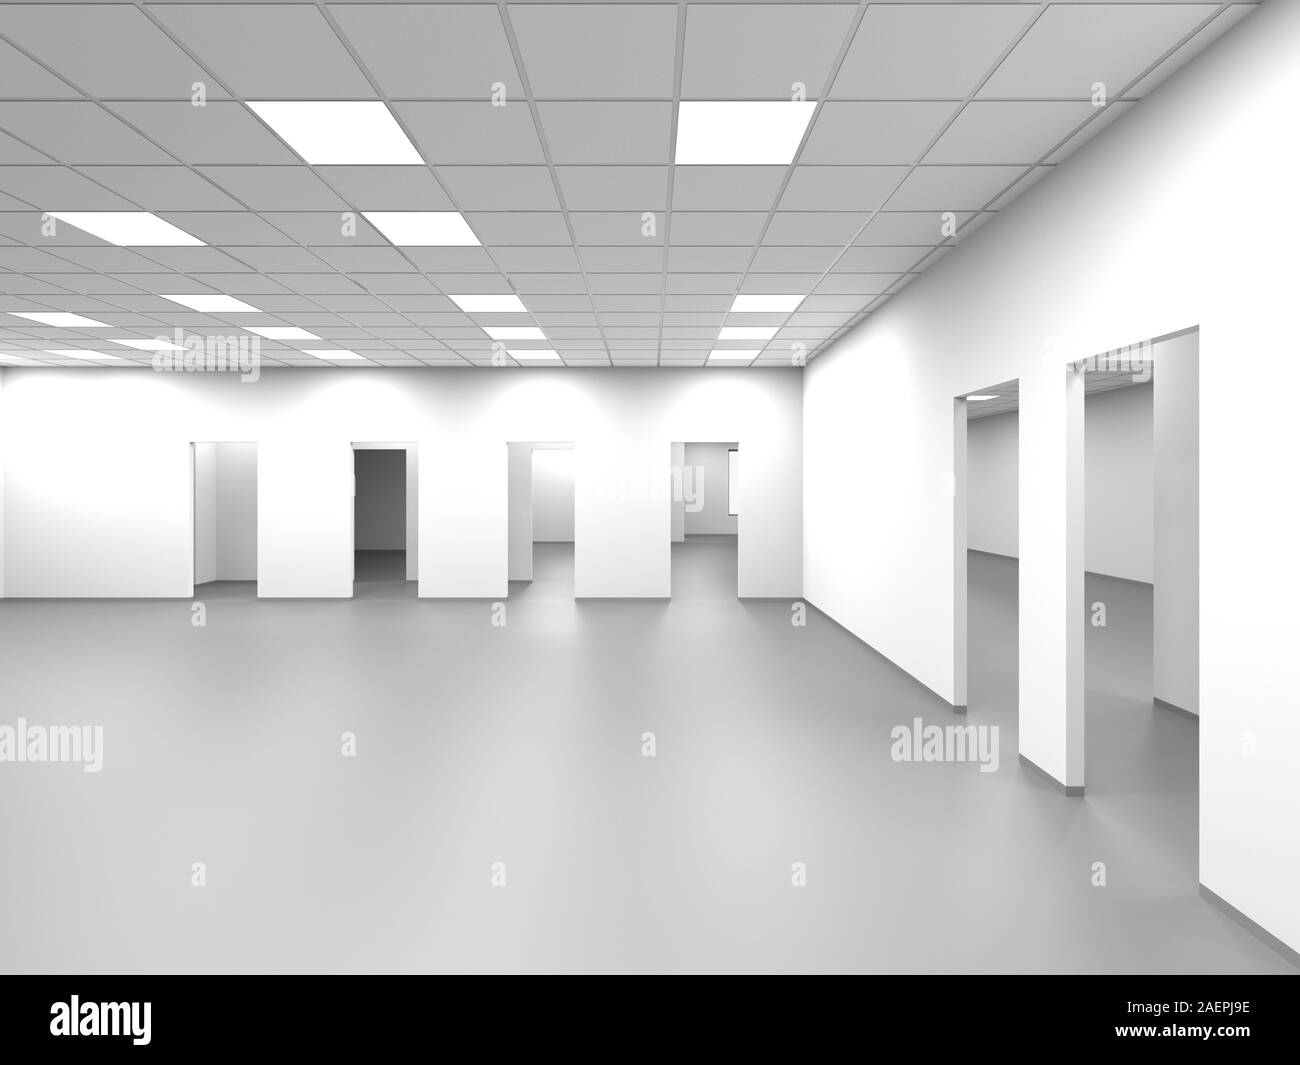 An empty open space office room with white walls and blank doorways, abstract interior background, 3d rendering illustration Stock Photo